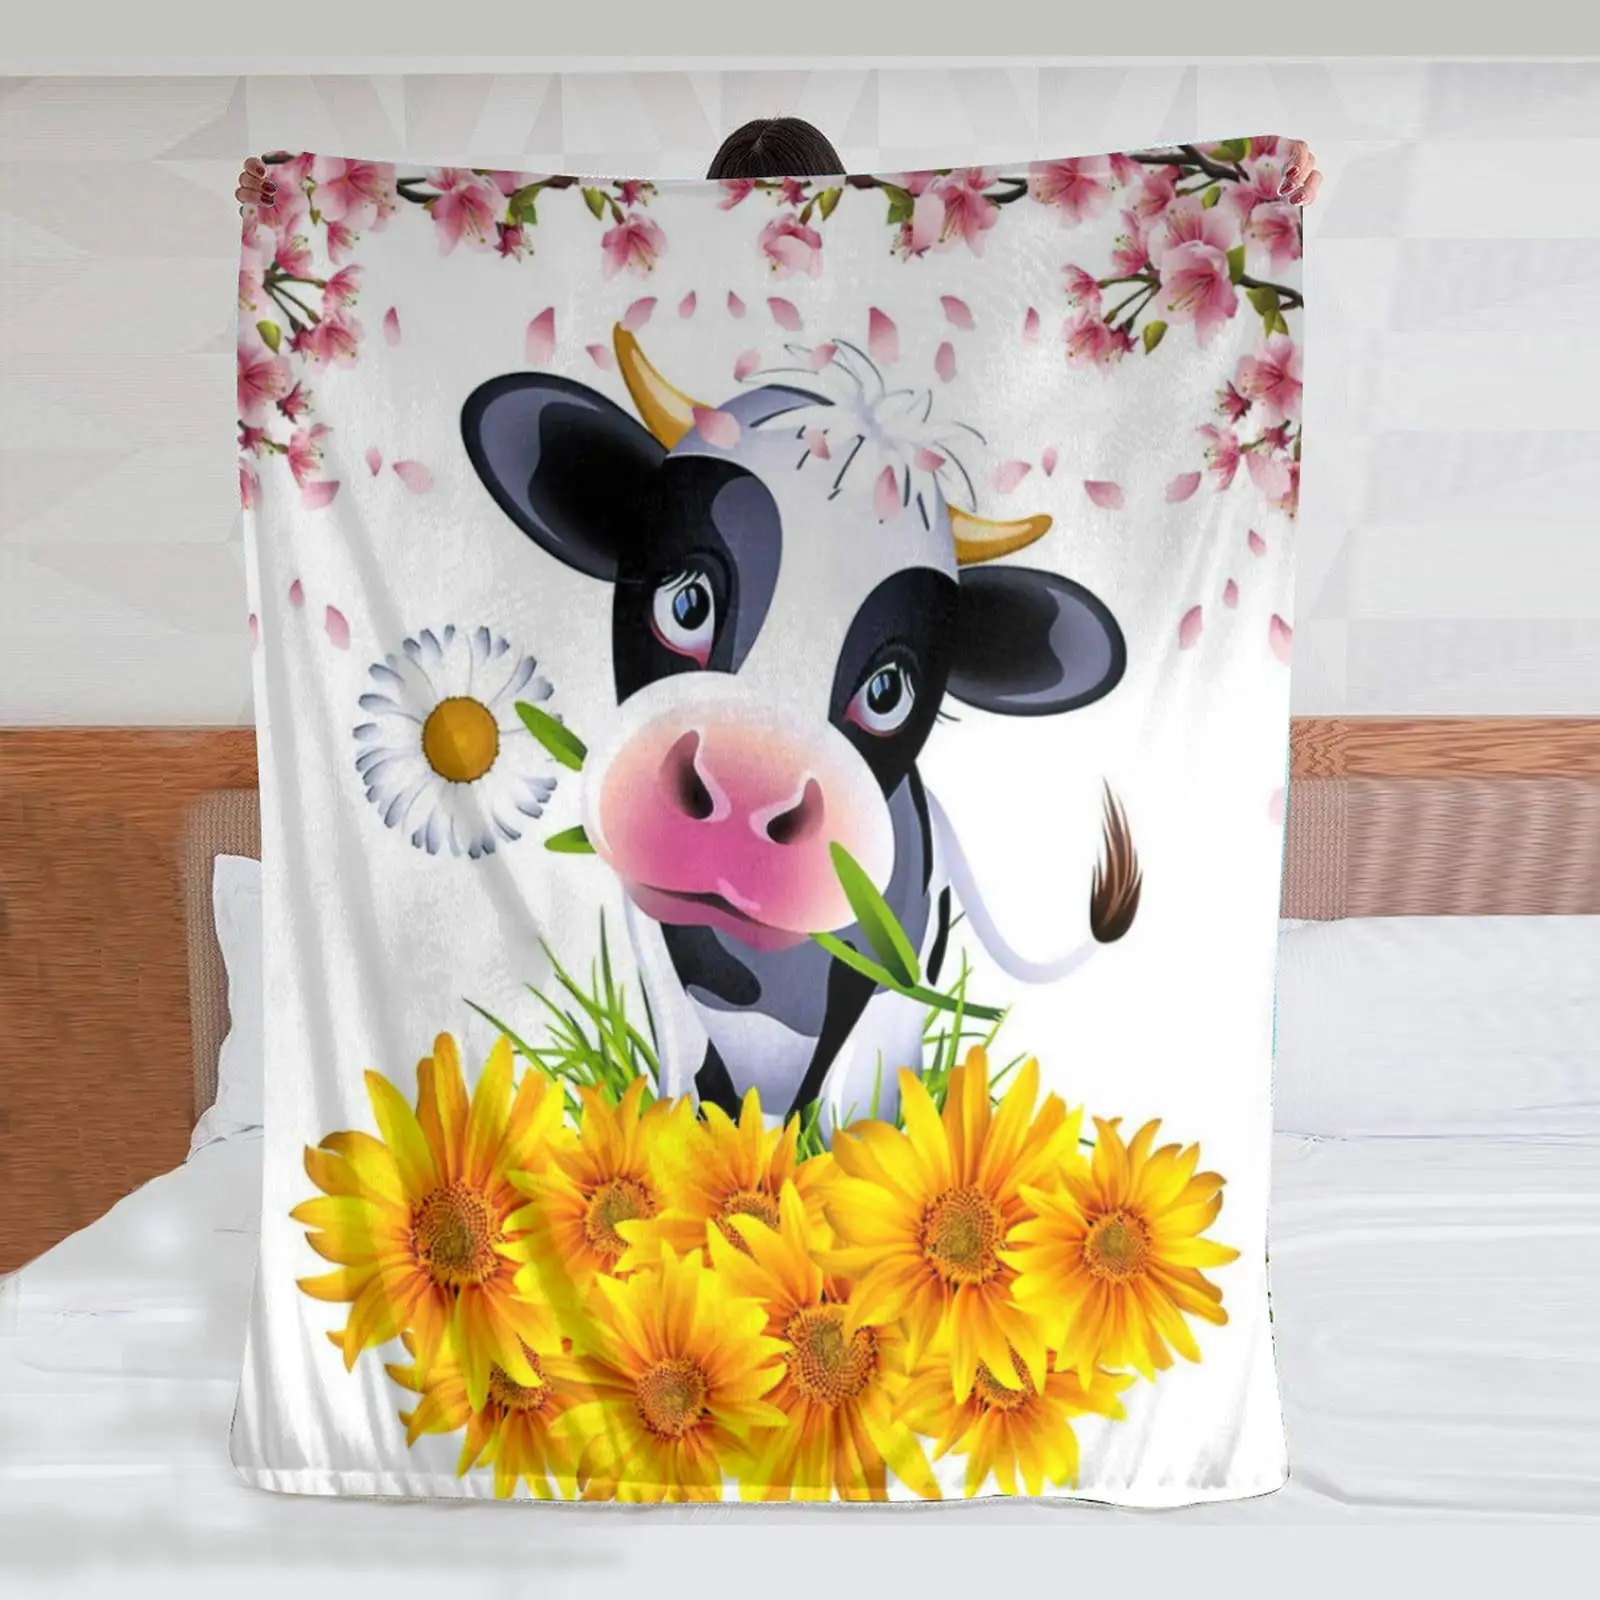 

Cow Print Blanket Black White Bed Throws Soft Couch Warm Small Blankets Plush Gift for Daughter Mom, Bedroom Decor Sofa Cozy